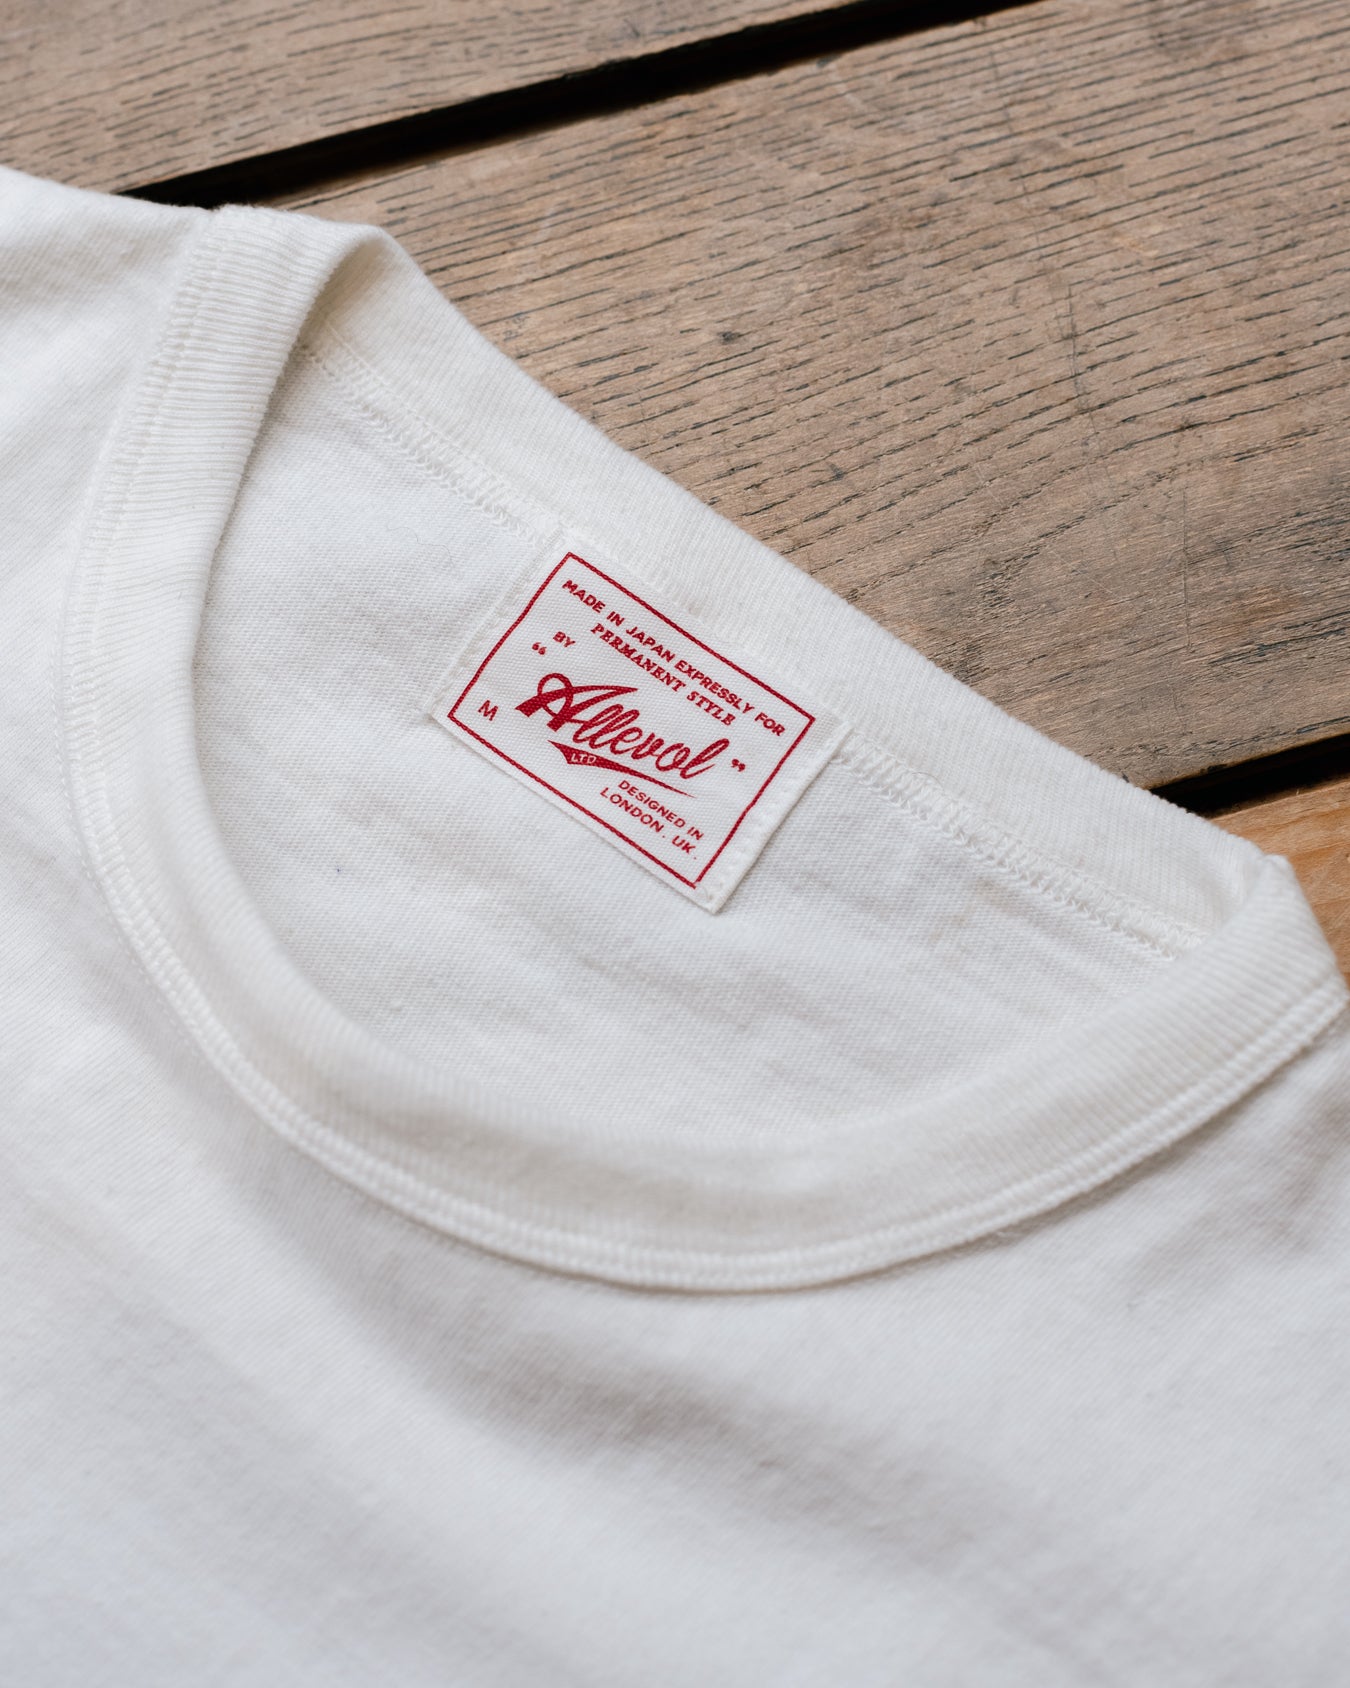 – The T-shirt Tapered Permanent Style